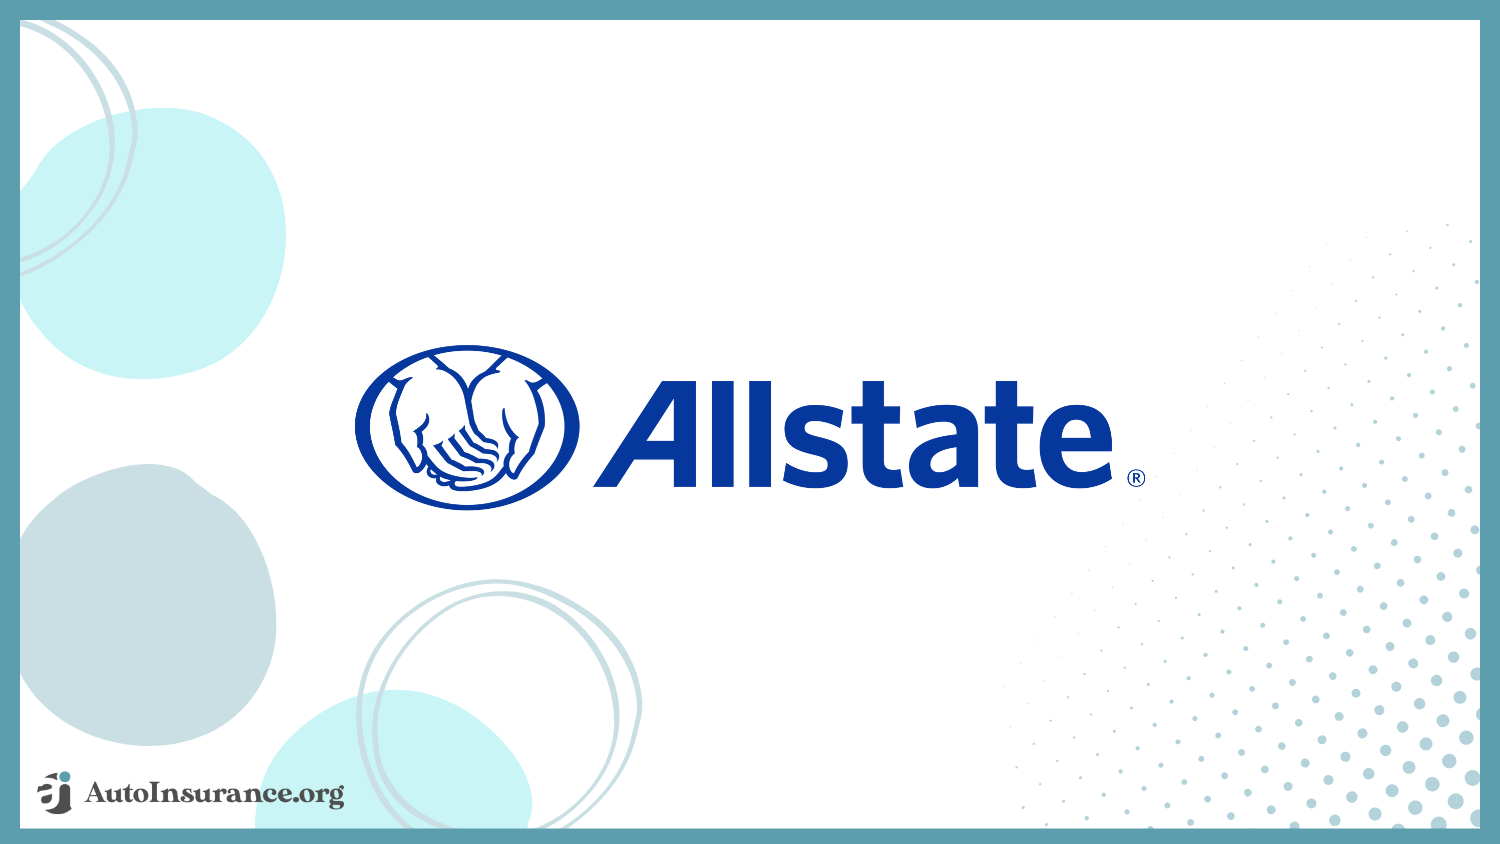 Allstate: Best Auto Insurance for International Drivers